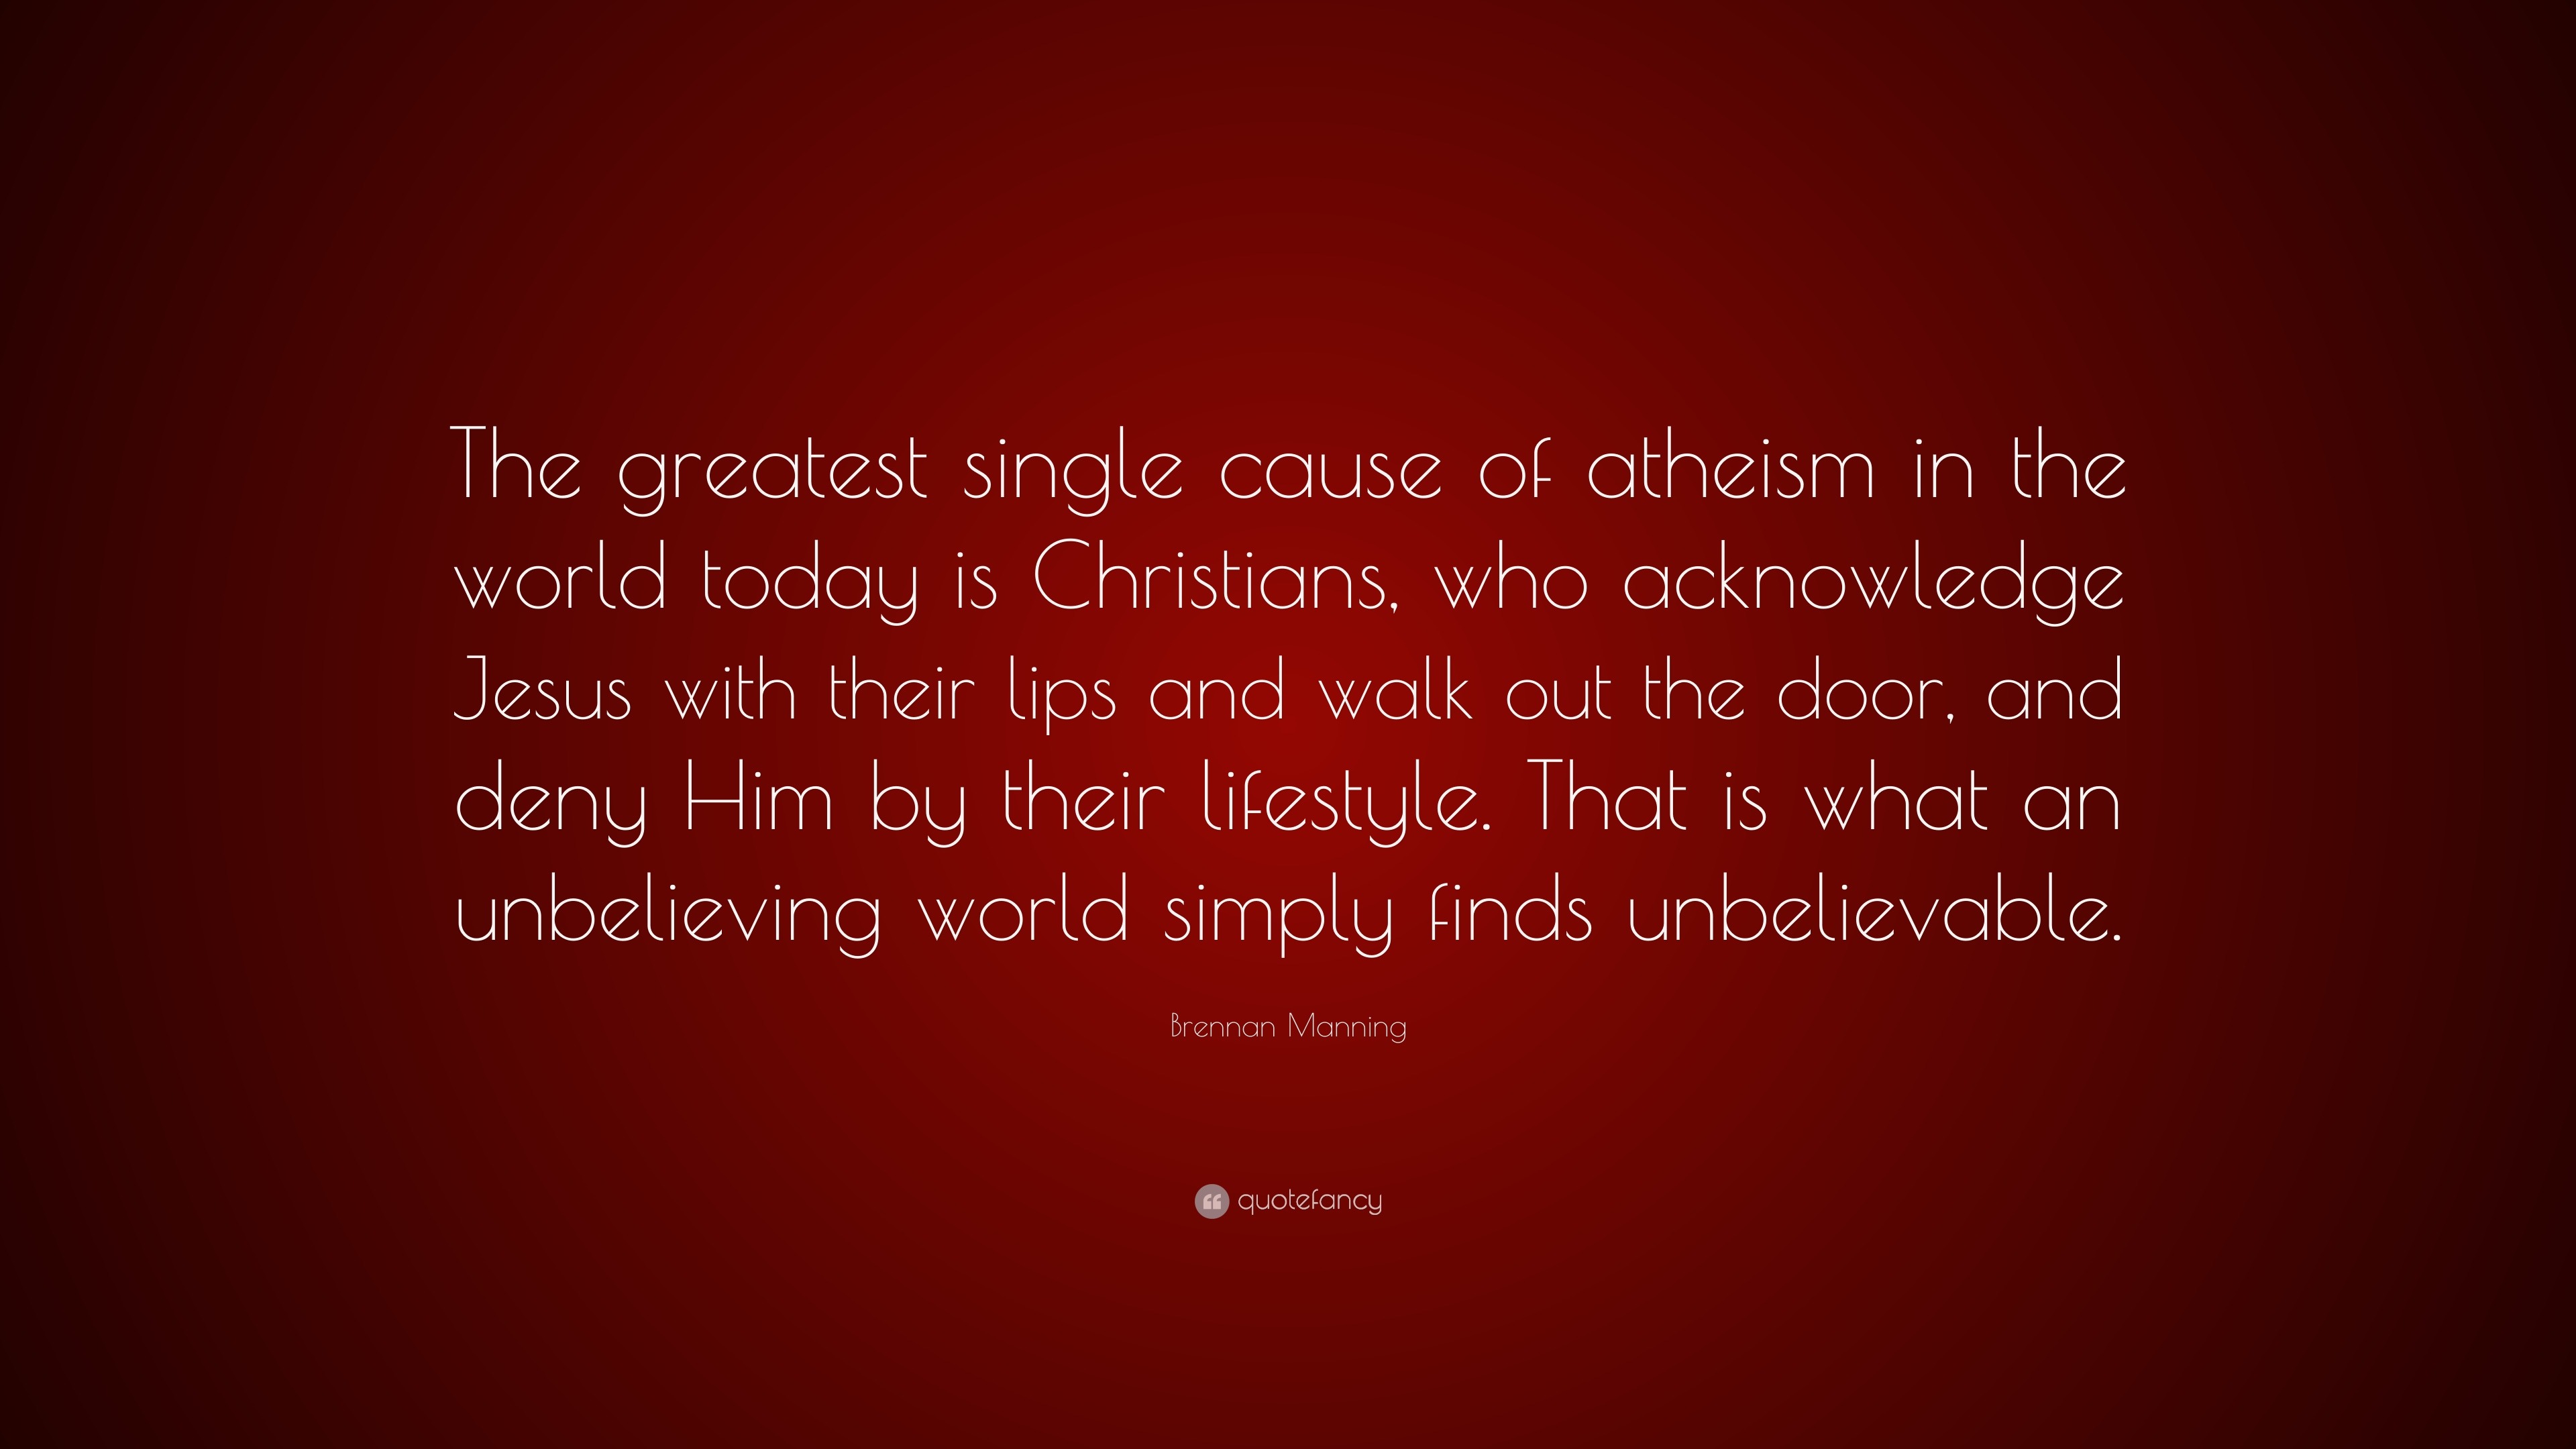 Brennan Manning Quote: “The greatest single cause of atheism in the world  today is Christians, who acknowledge Jesus with their lips and walk ou”